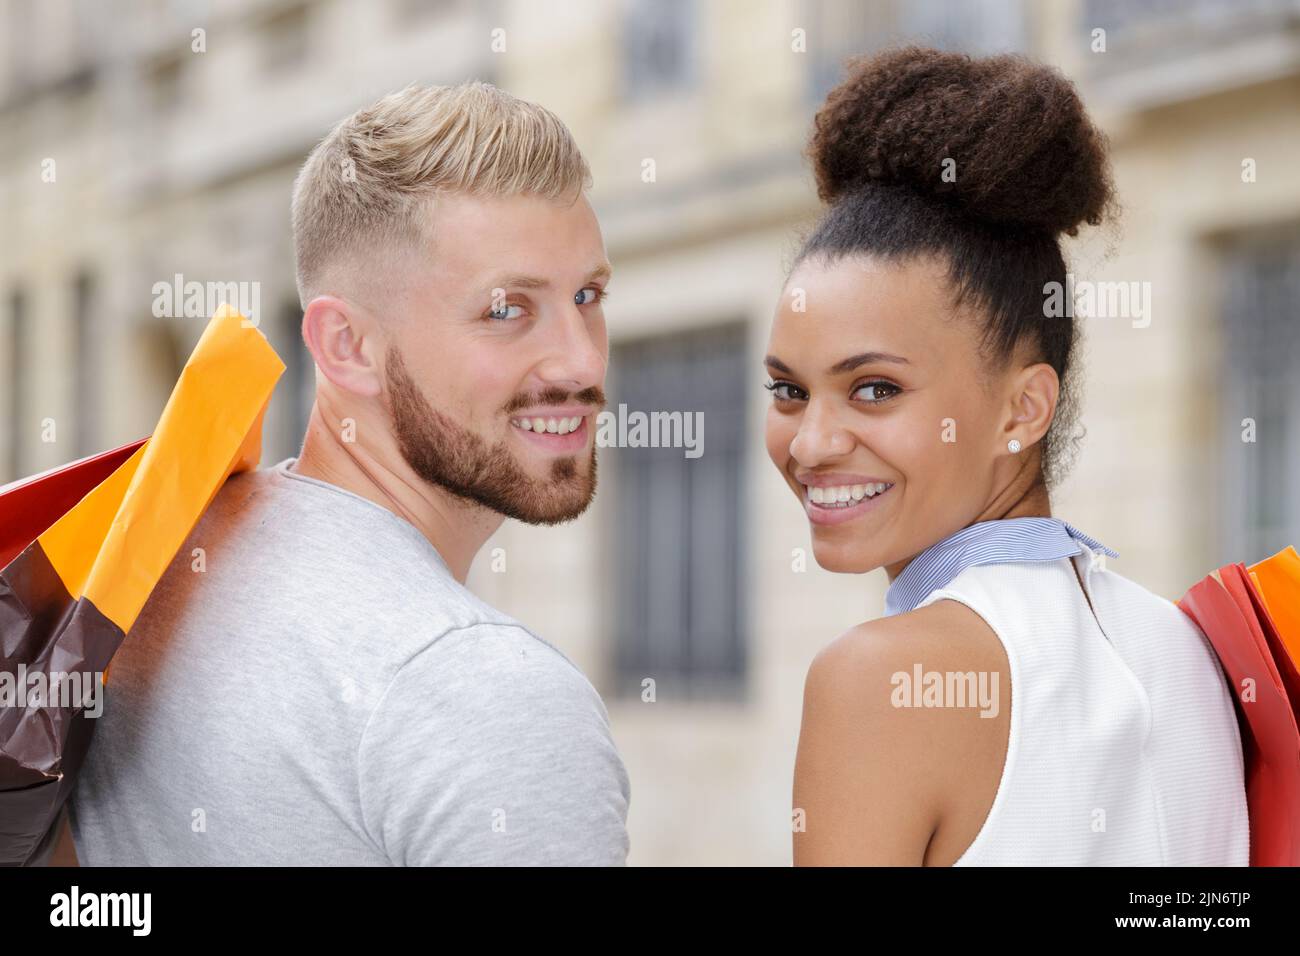 a couple with shopping bags Stock Photo